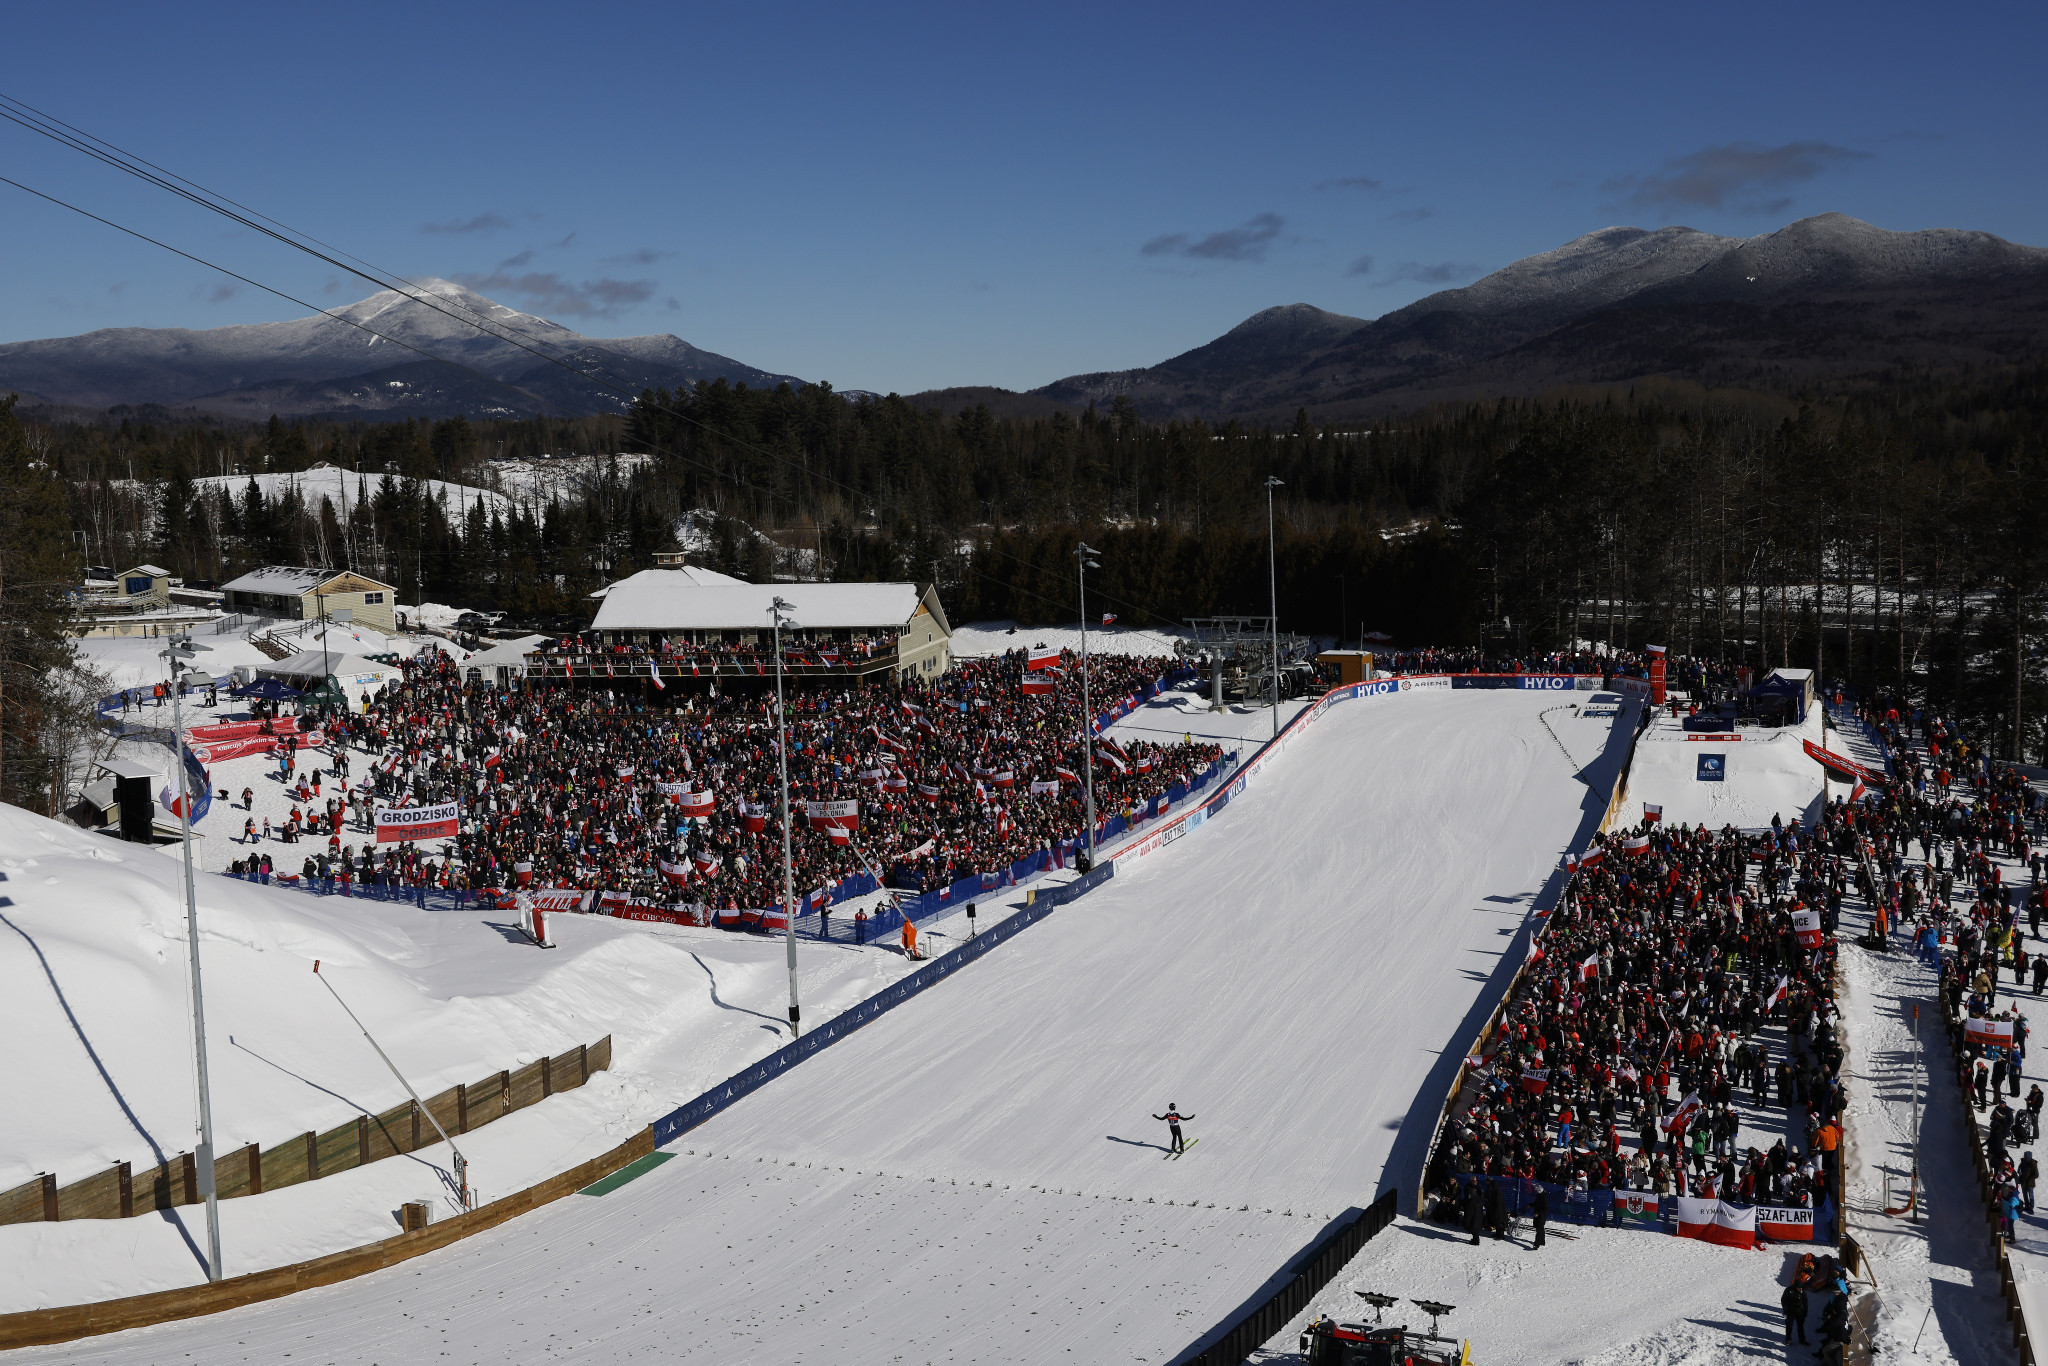 Lake Placid staged its first FIS Ski Jumping World Cup since 1990 in February ©Getty Images